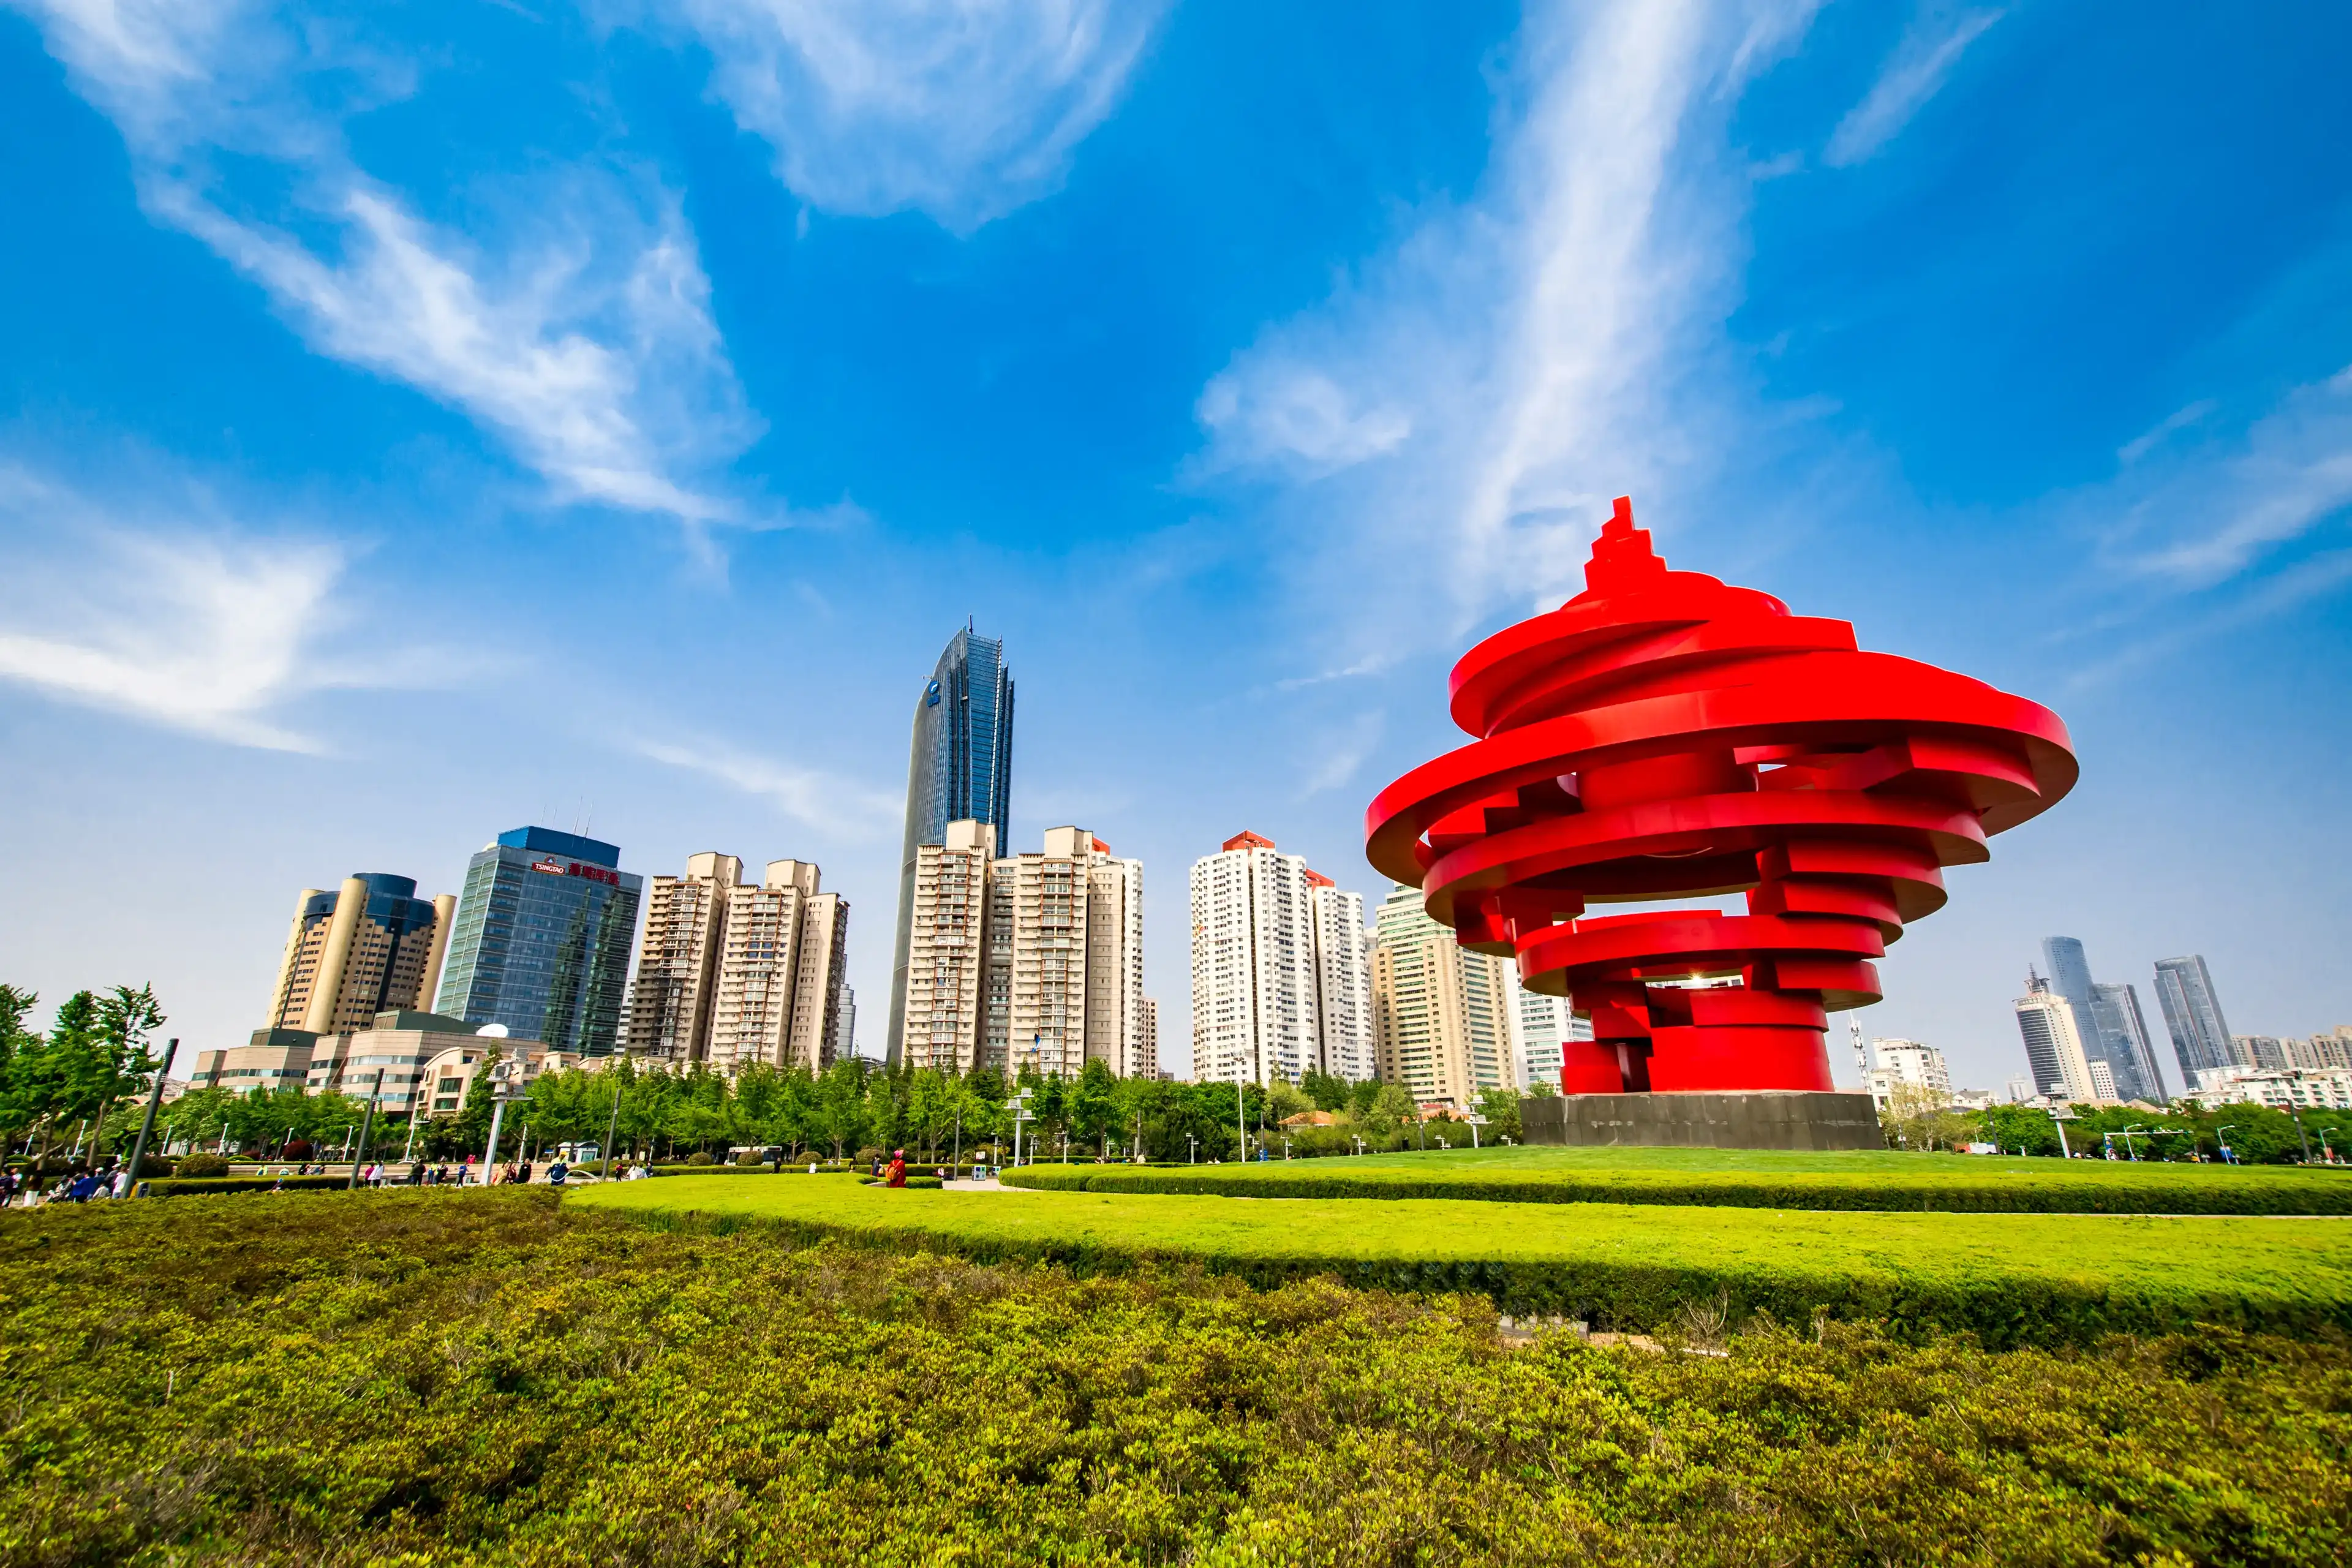 QINGDAO, SHANDONG, CHINA - MAY 11, 2019: "May Fourth" Wind sculpture in May Fourth Square with Qingdao downtown skyscrapers in the background